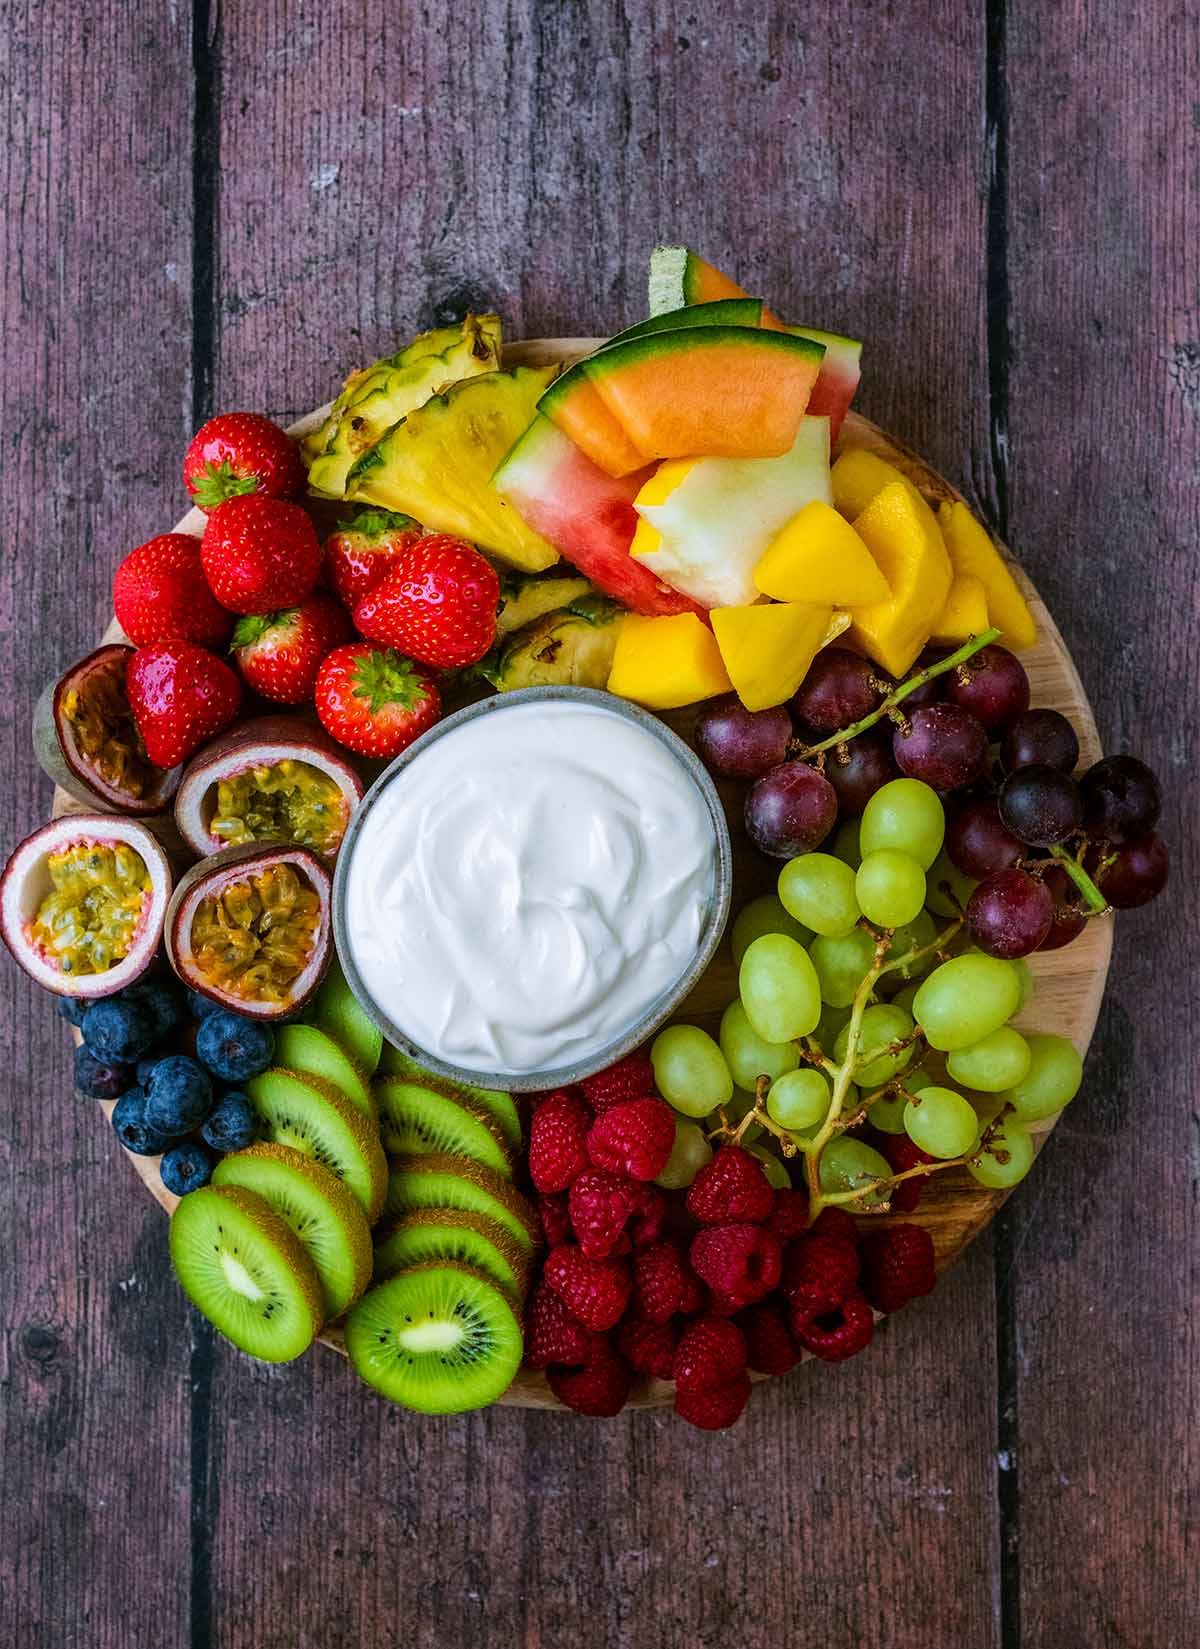 A large round platter of different fruit with a bowl of creamy dip.